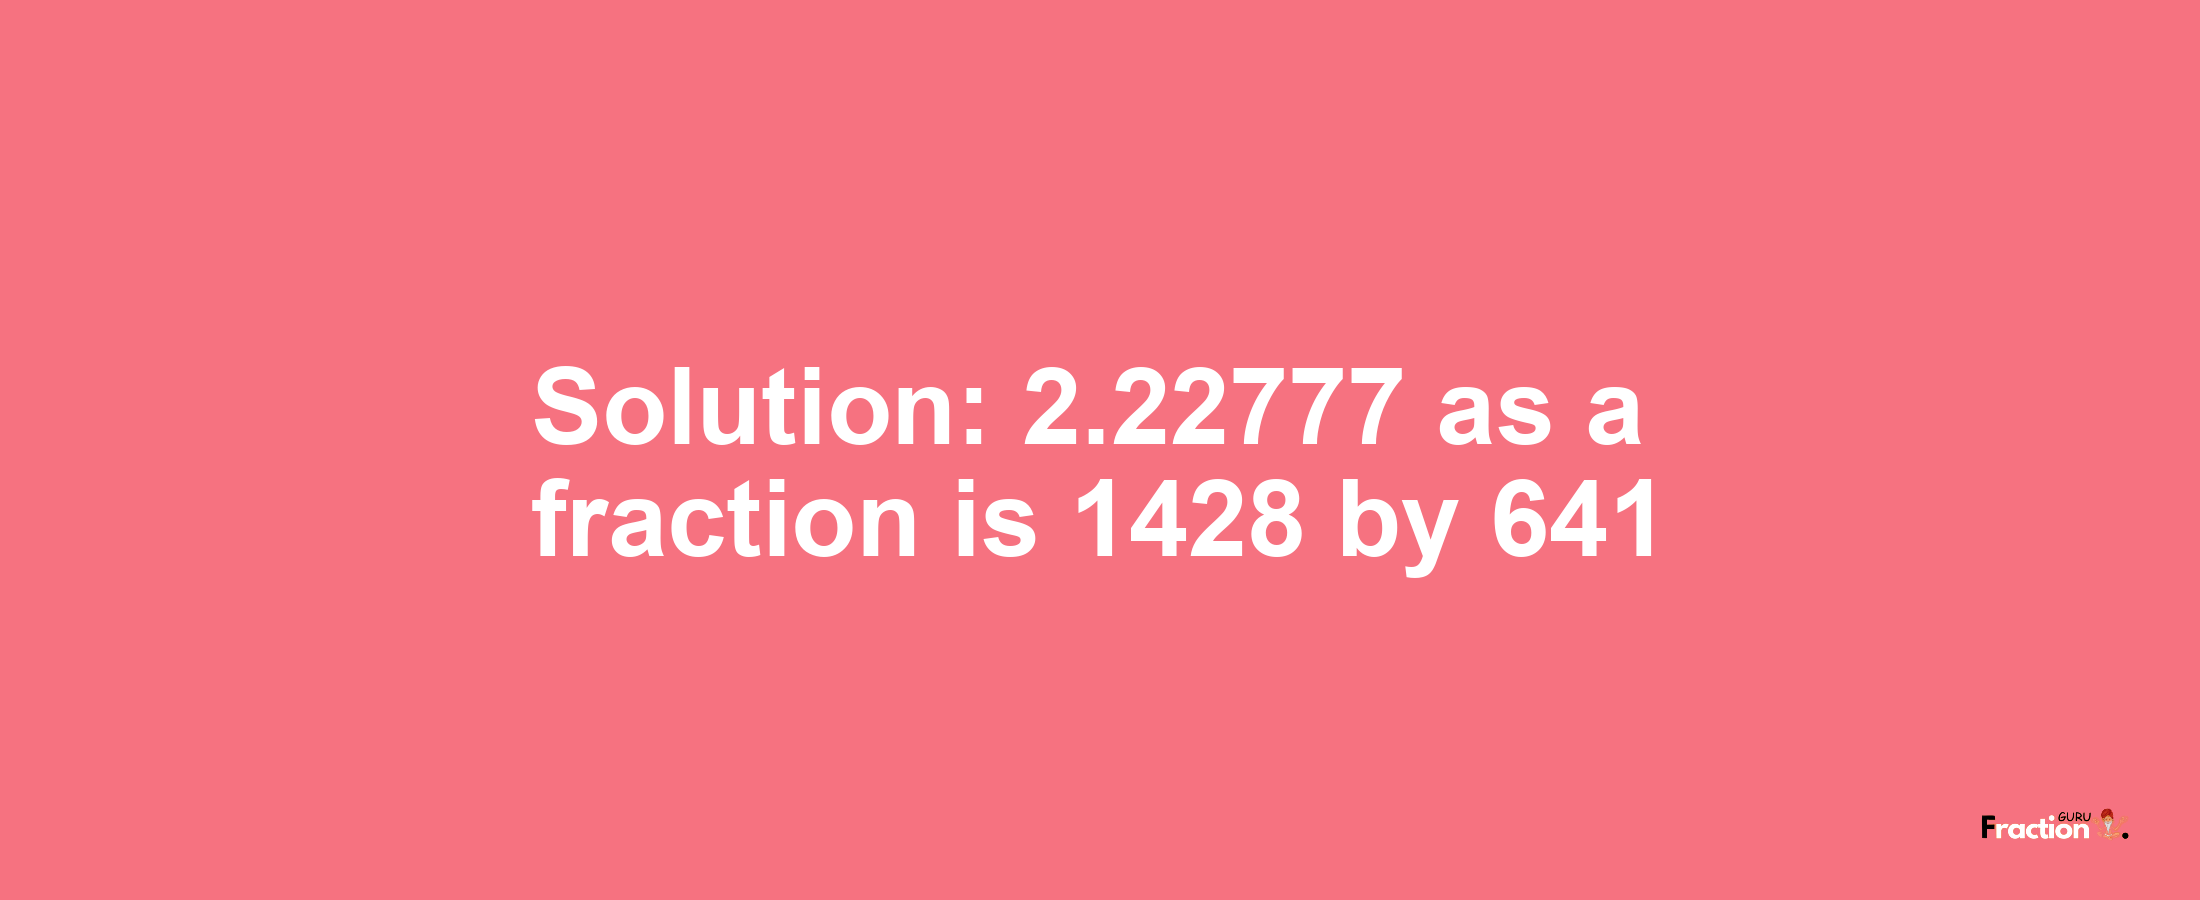 Solution:2.22777 as a fraction is 1428/641